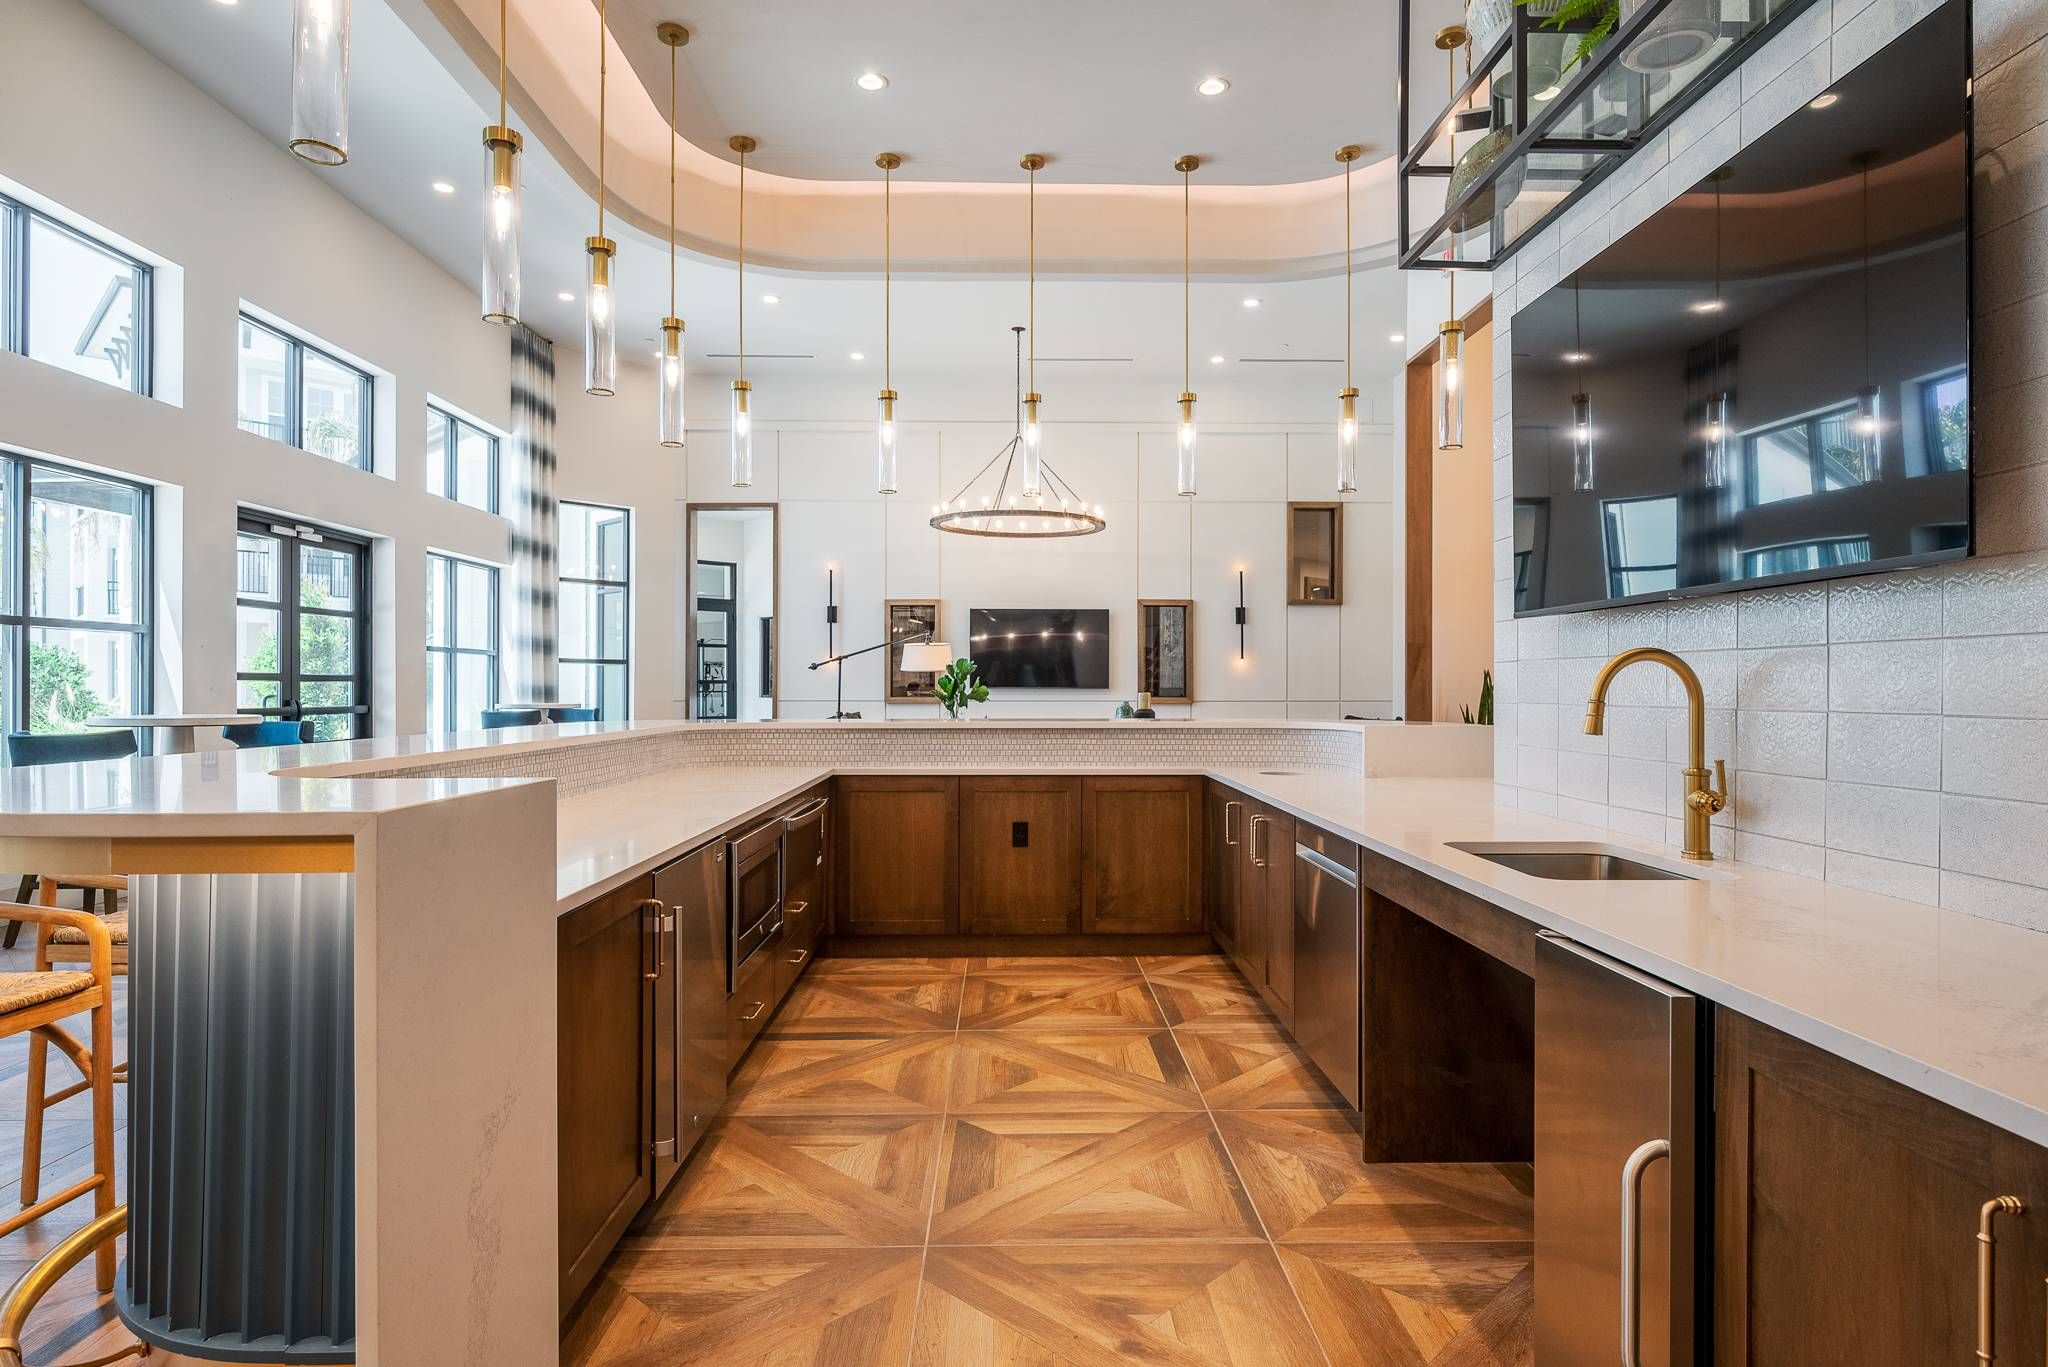 An open-concept kitchen with stainless steel appliances, wood cabinetry, and a curved kitchen island in resident common area at Alta at Horizon West.